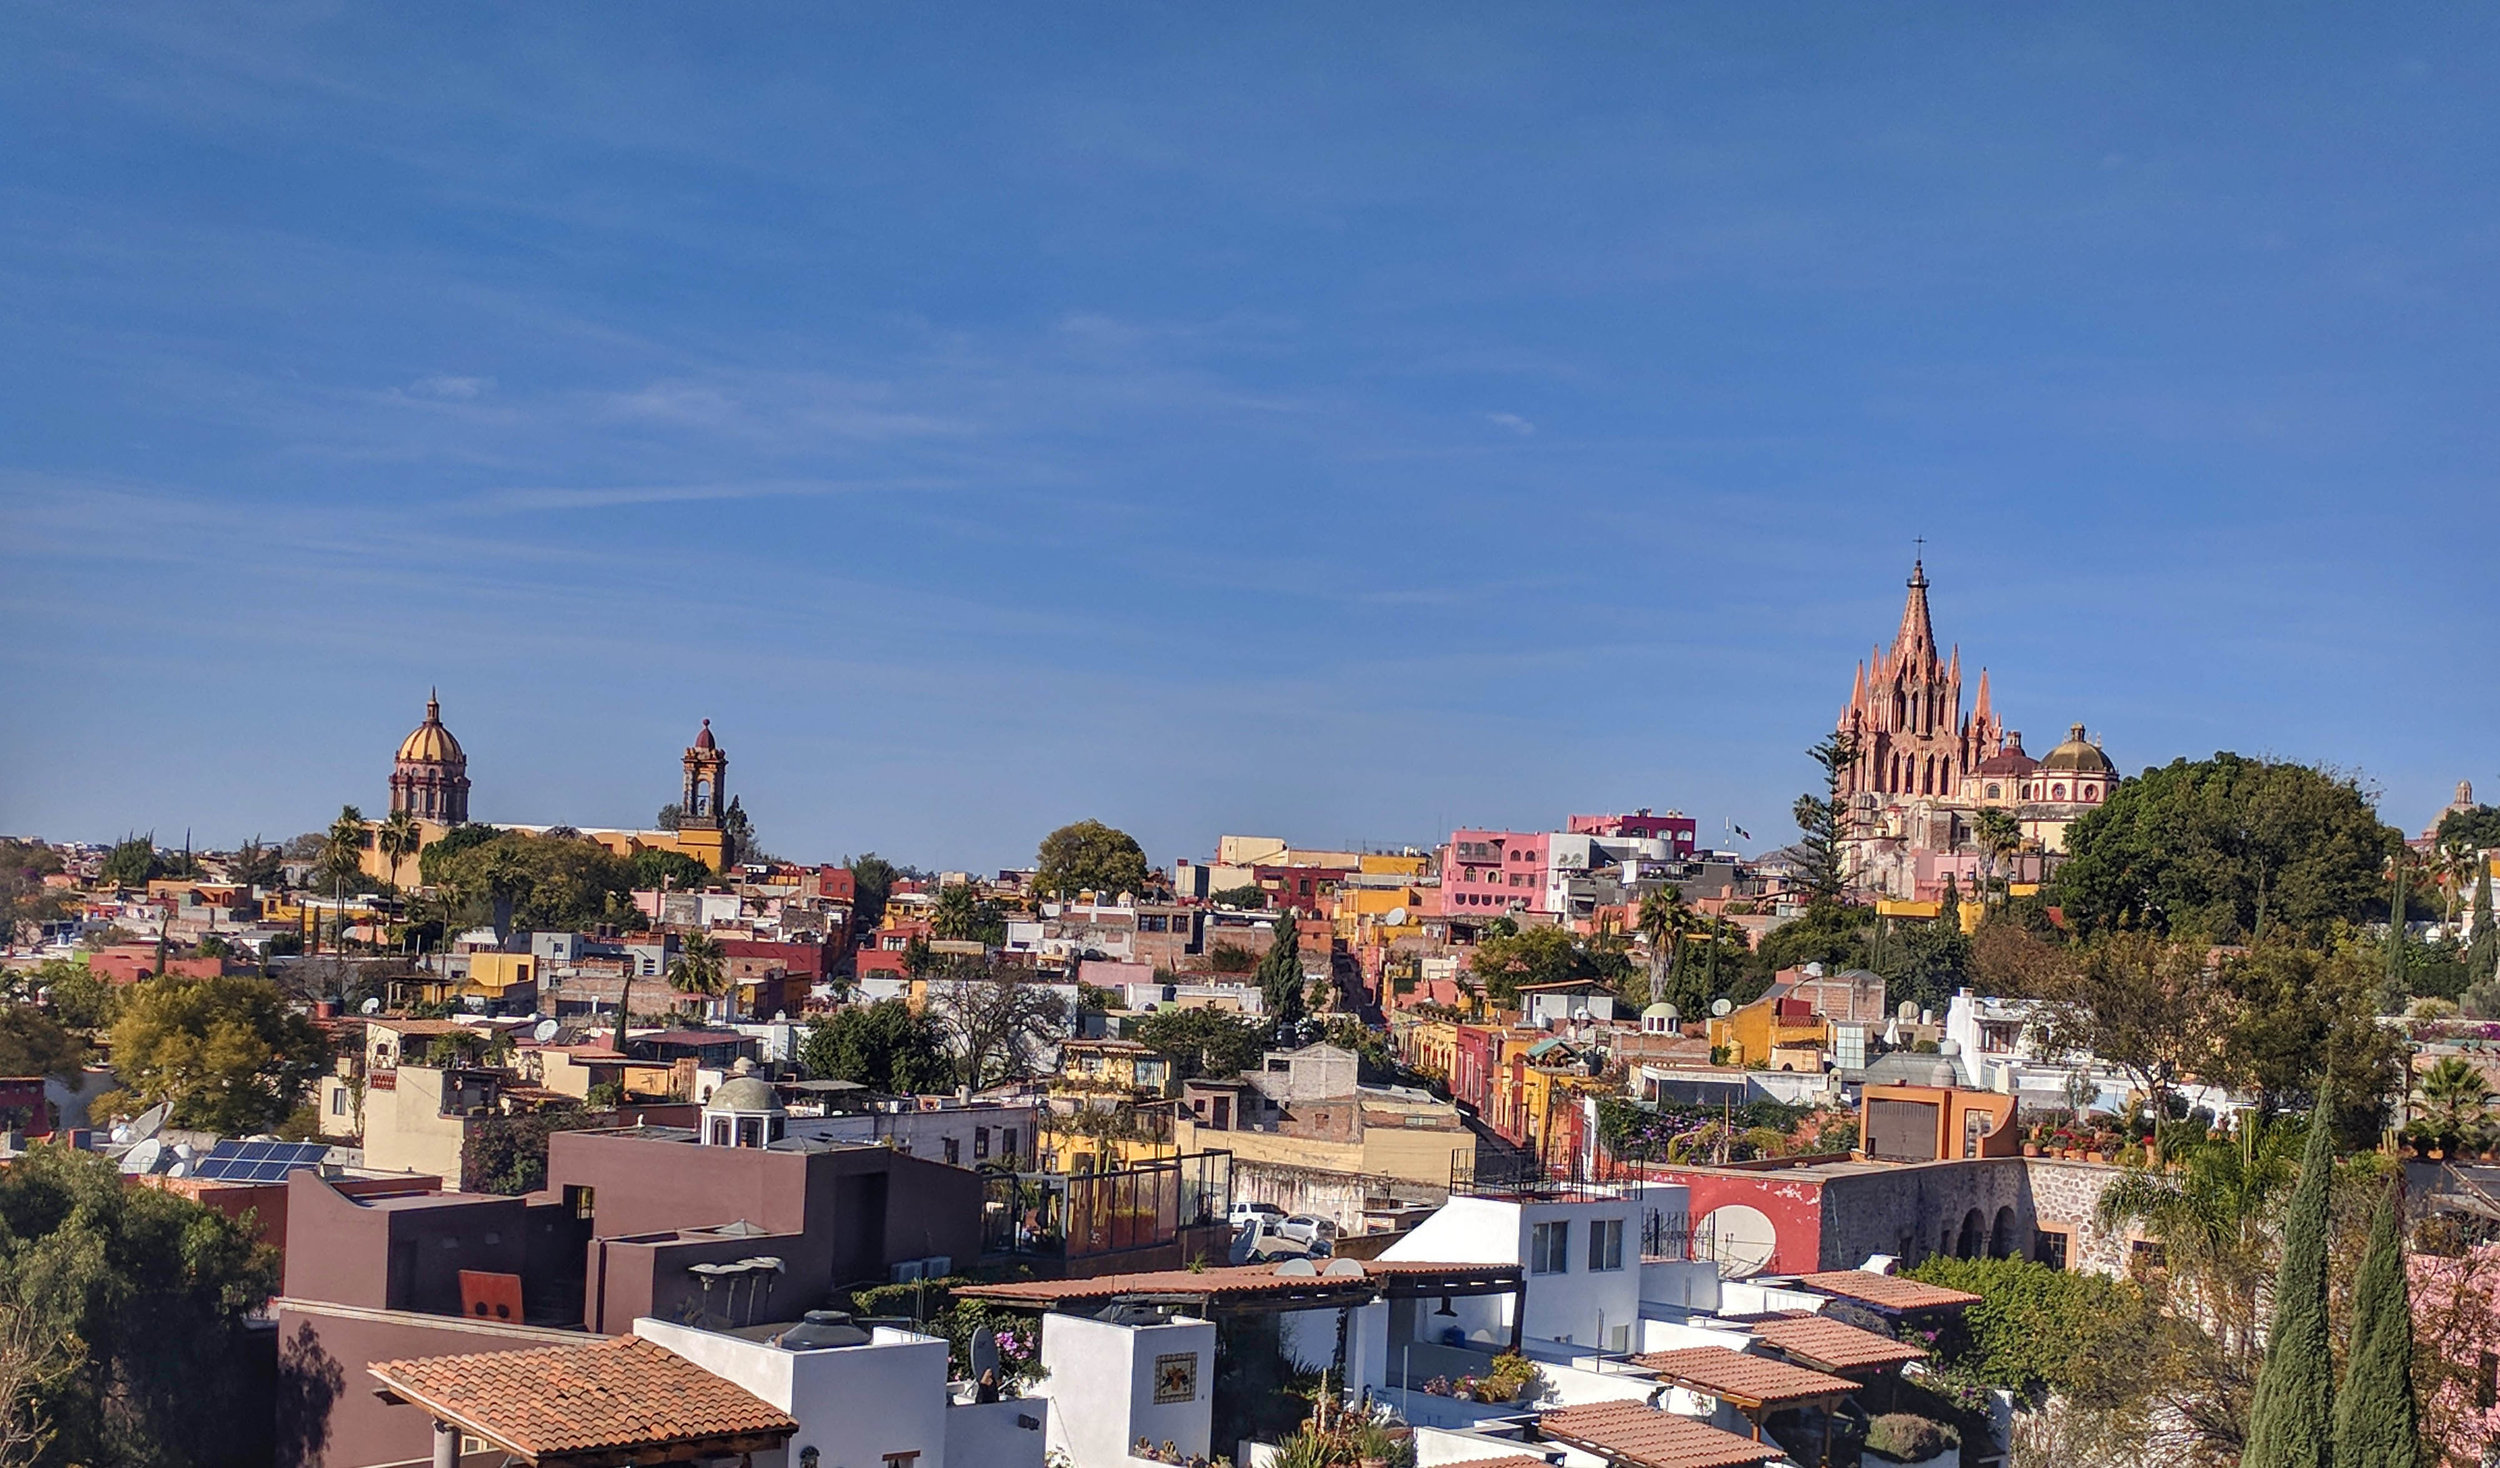 Our Guide To The Rooftop Bars Of San Miguel De Allende